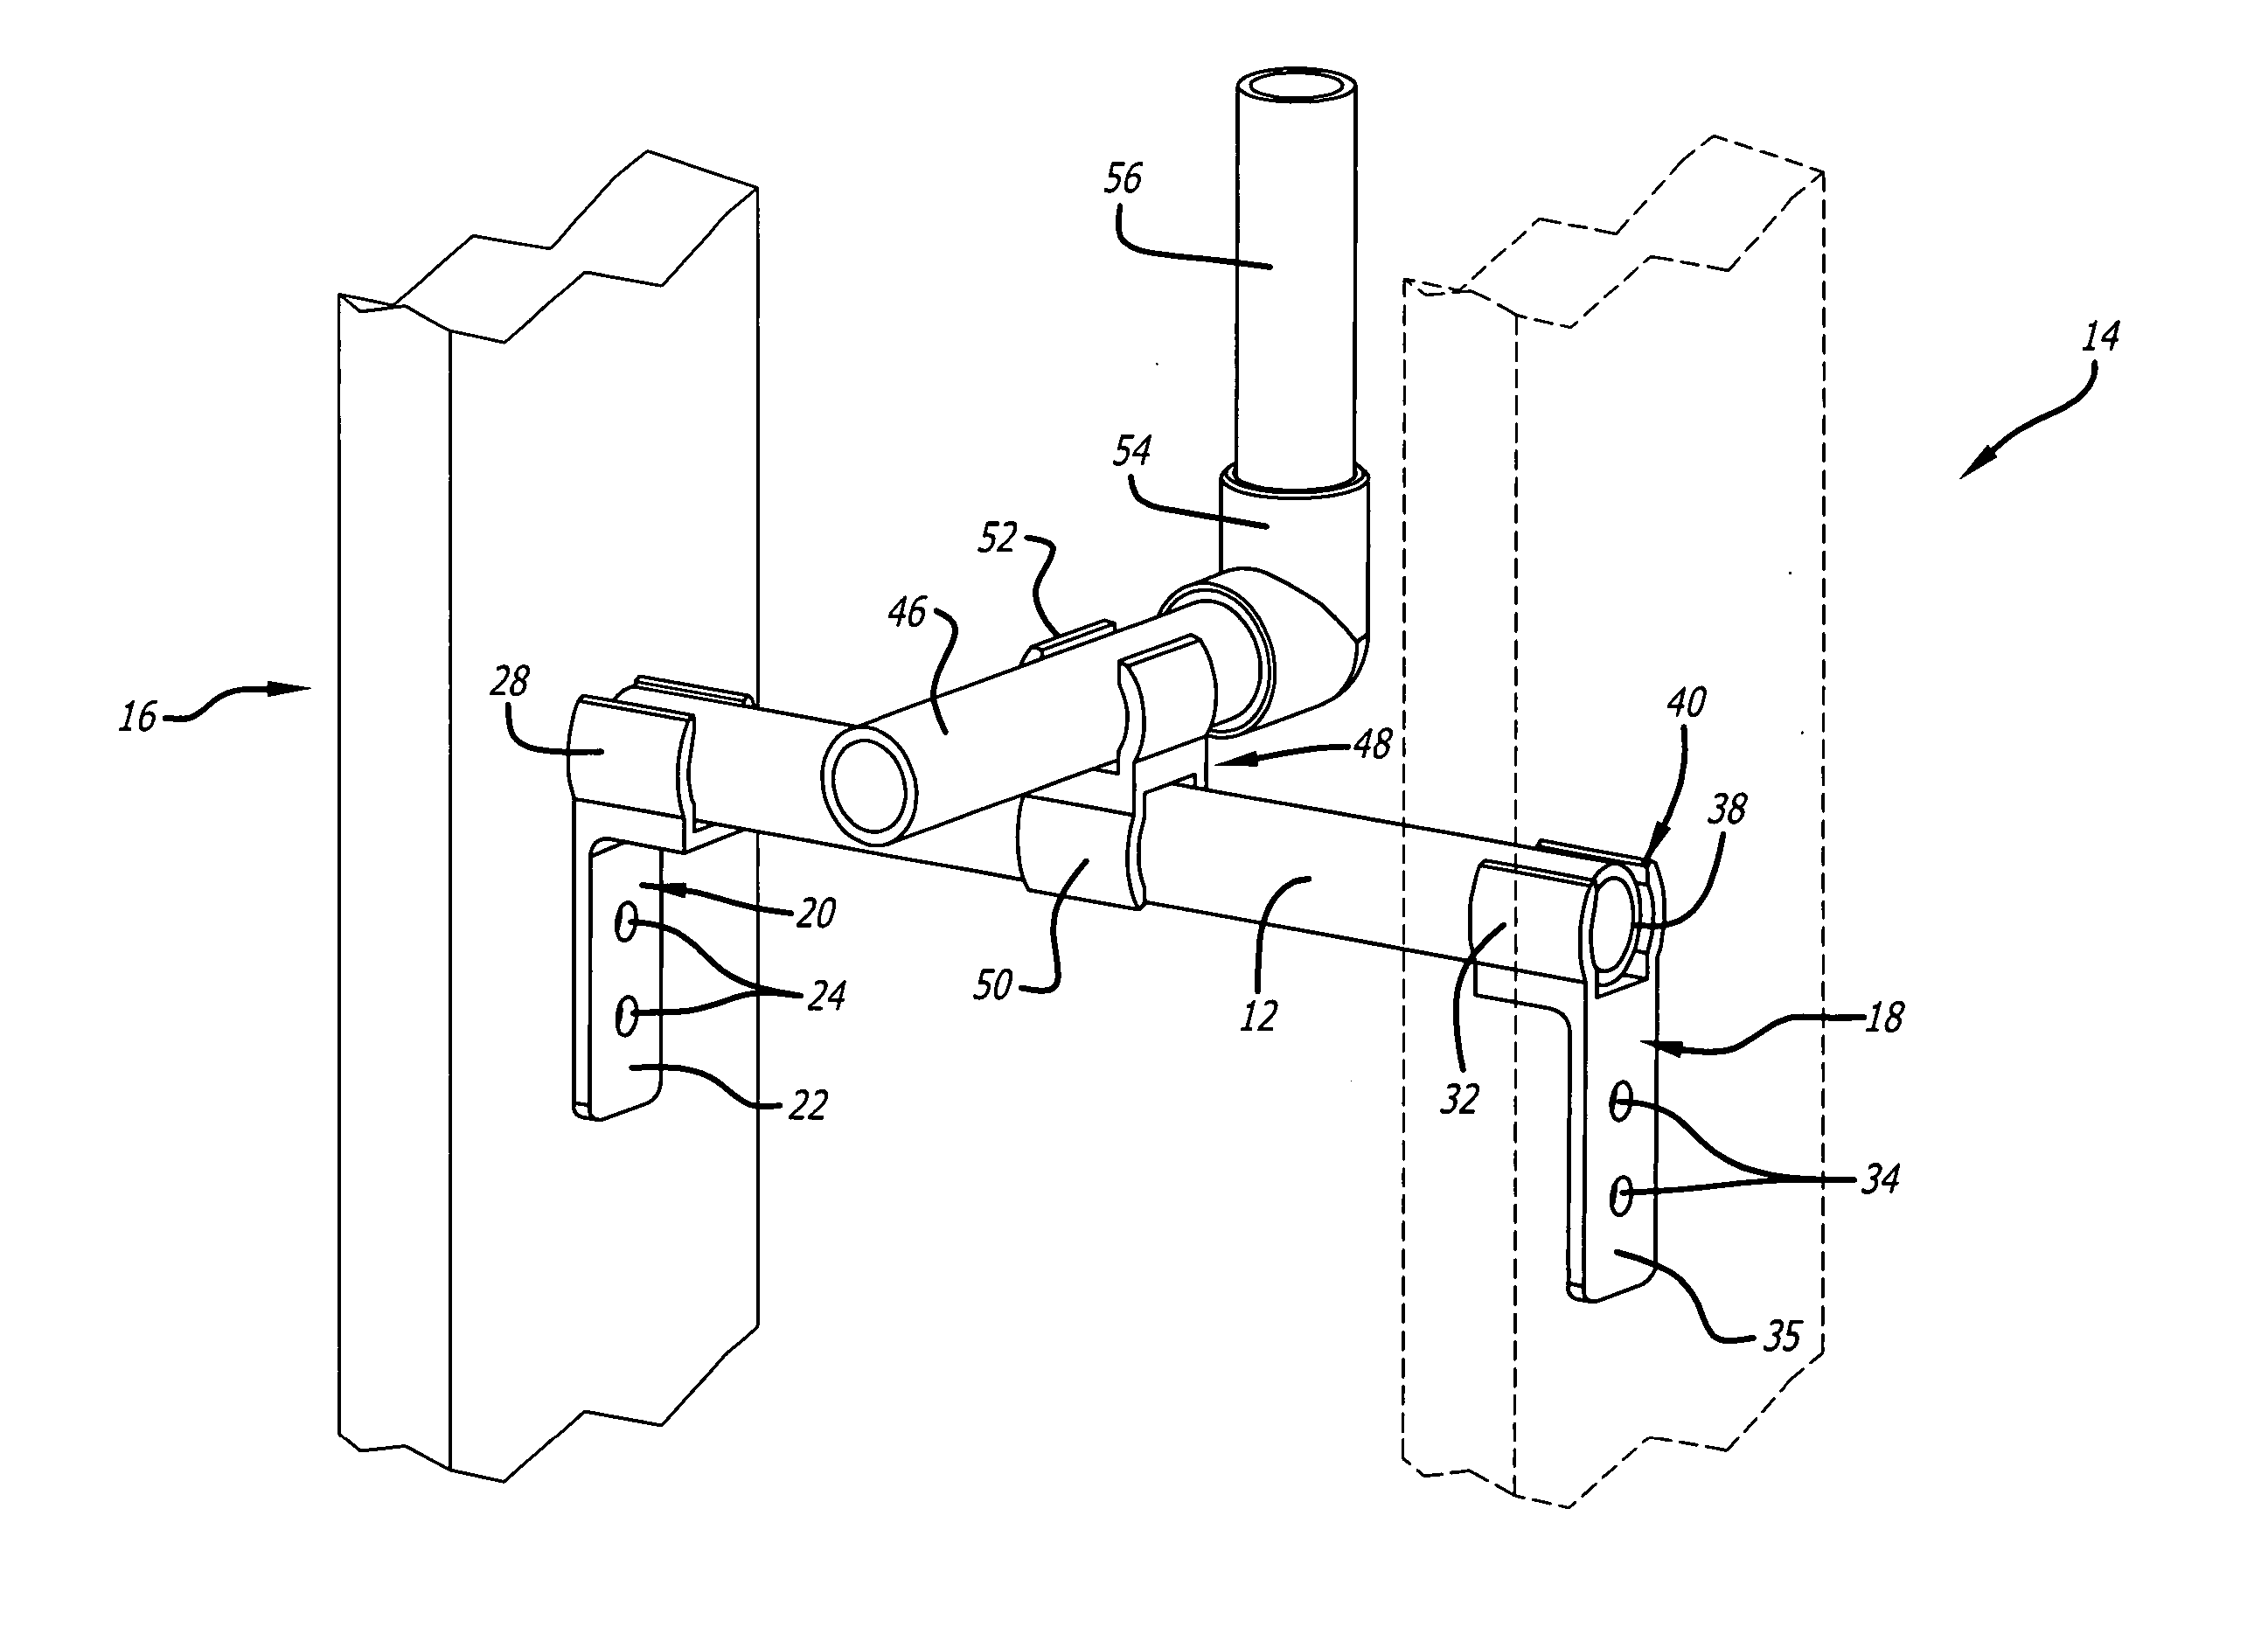 Simplified pipe support assembly